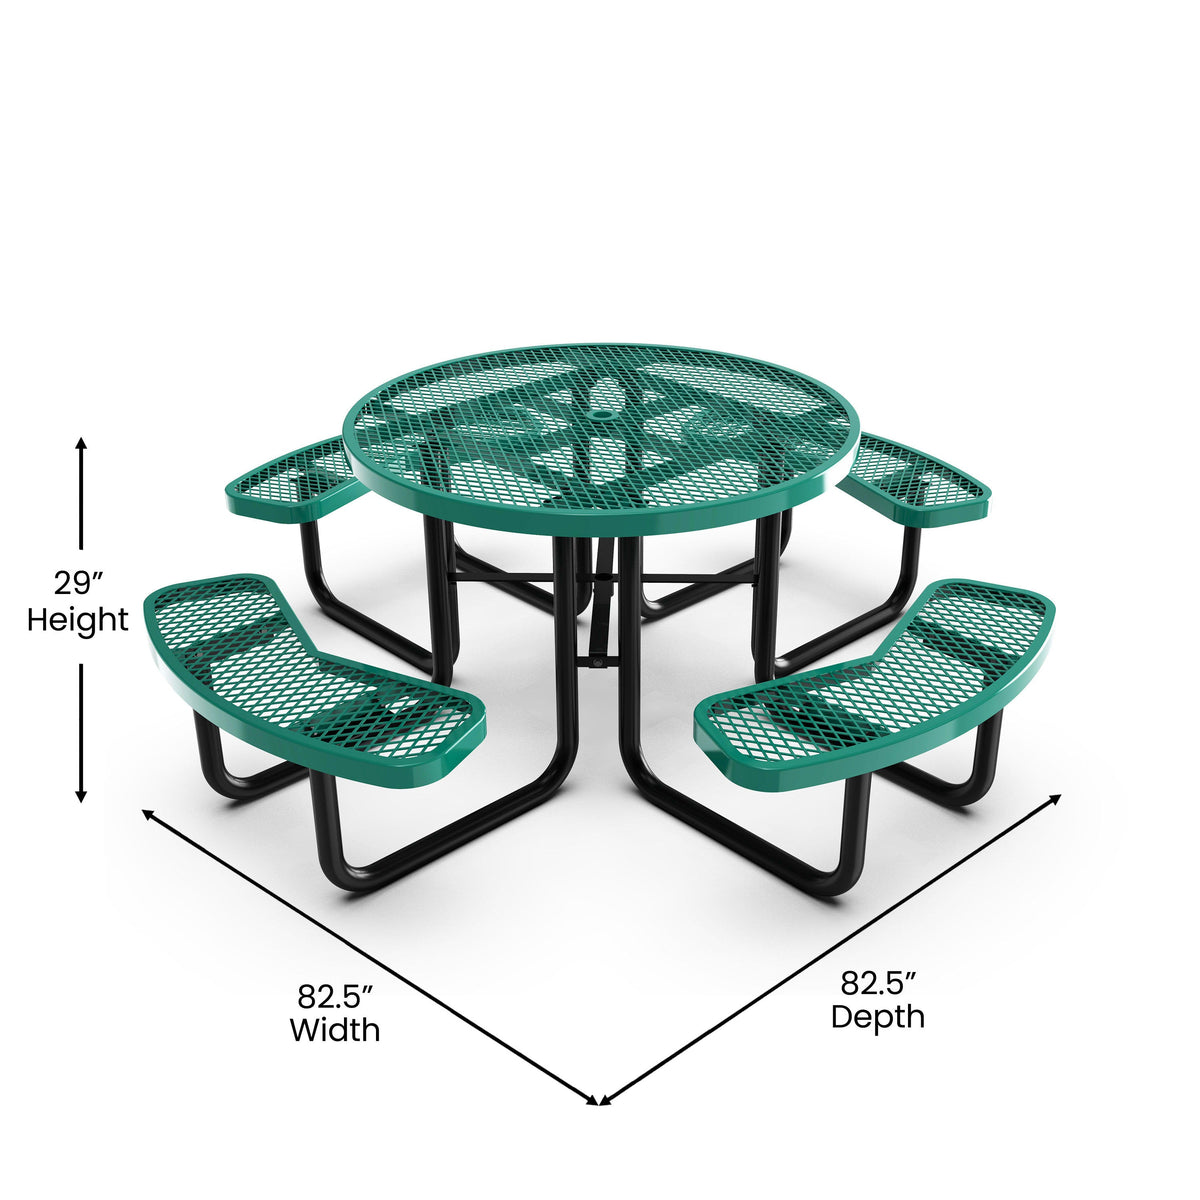 Green |#| Commercial 46 Inch Round Expanded Mesh Metal Picnic Table with Anchors - Green